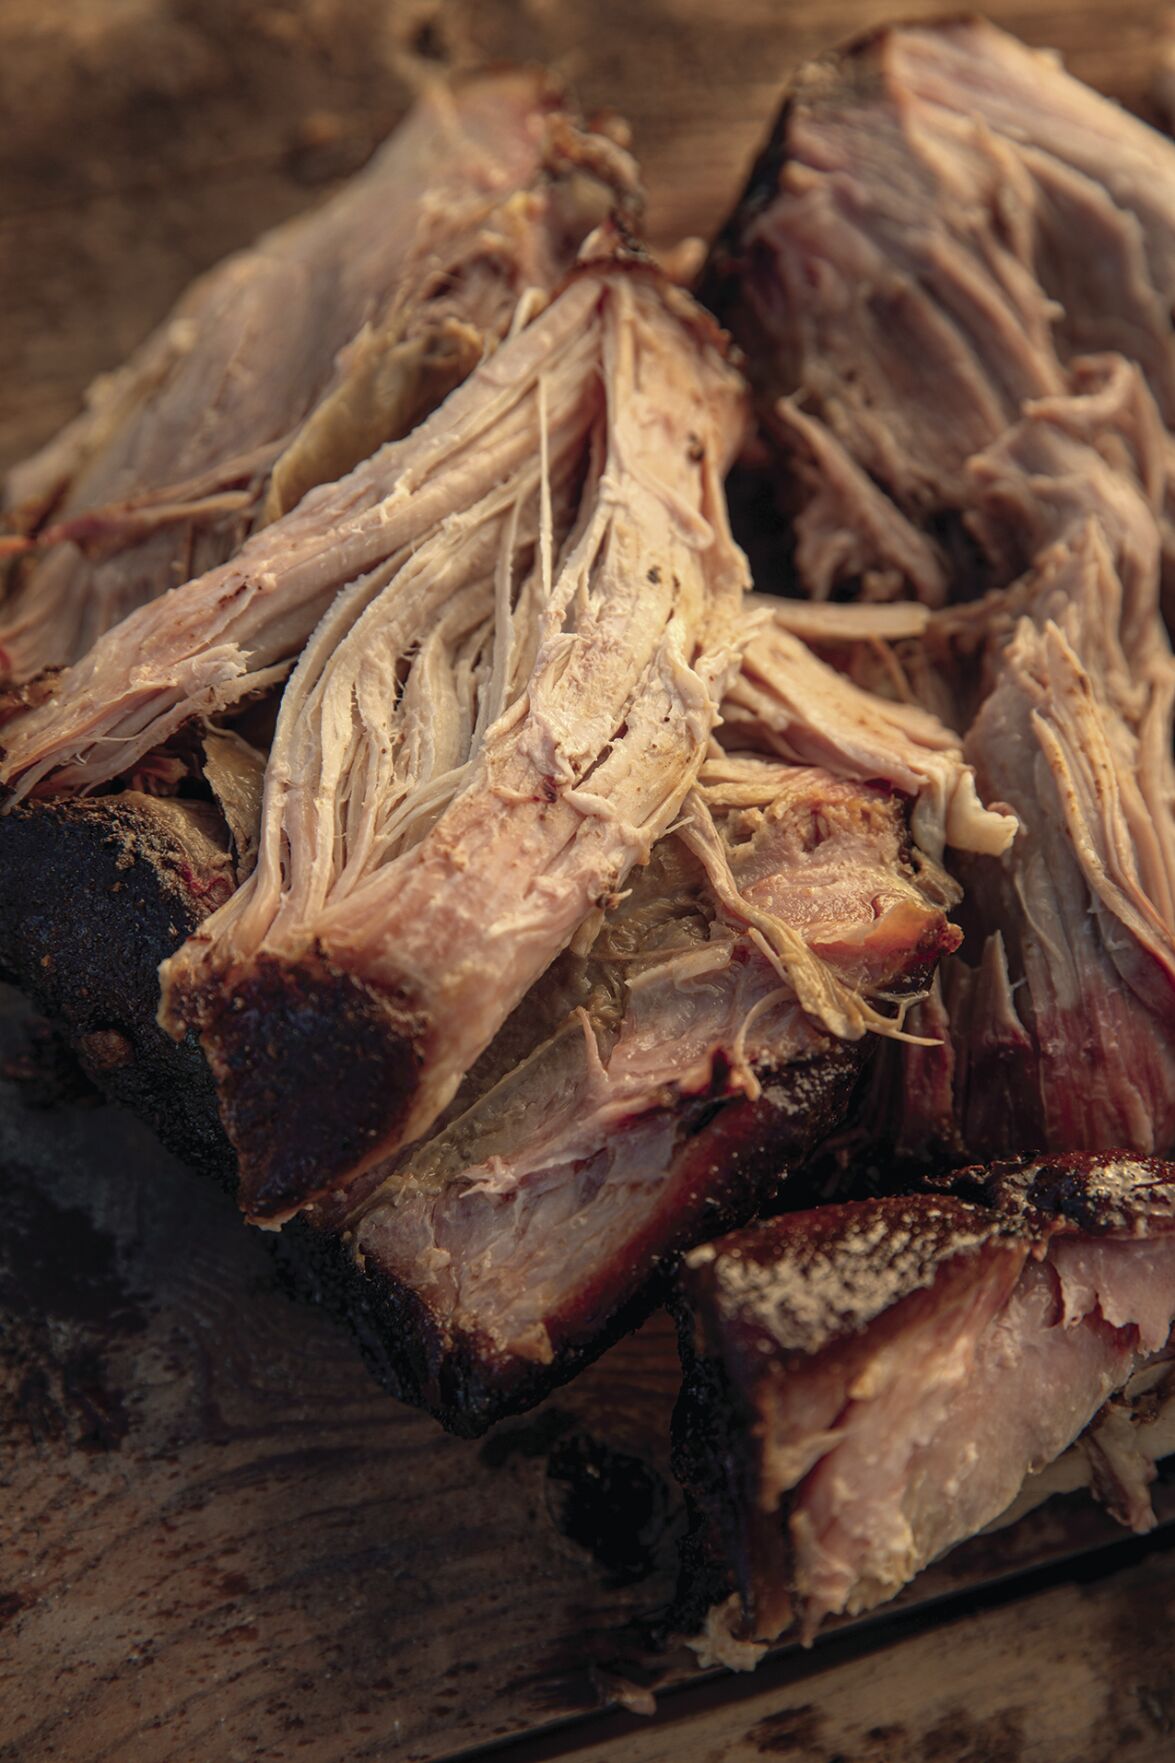 Beat the heat with smoked pulled pork  newspressnow pic pic